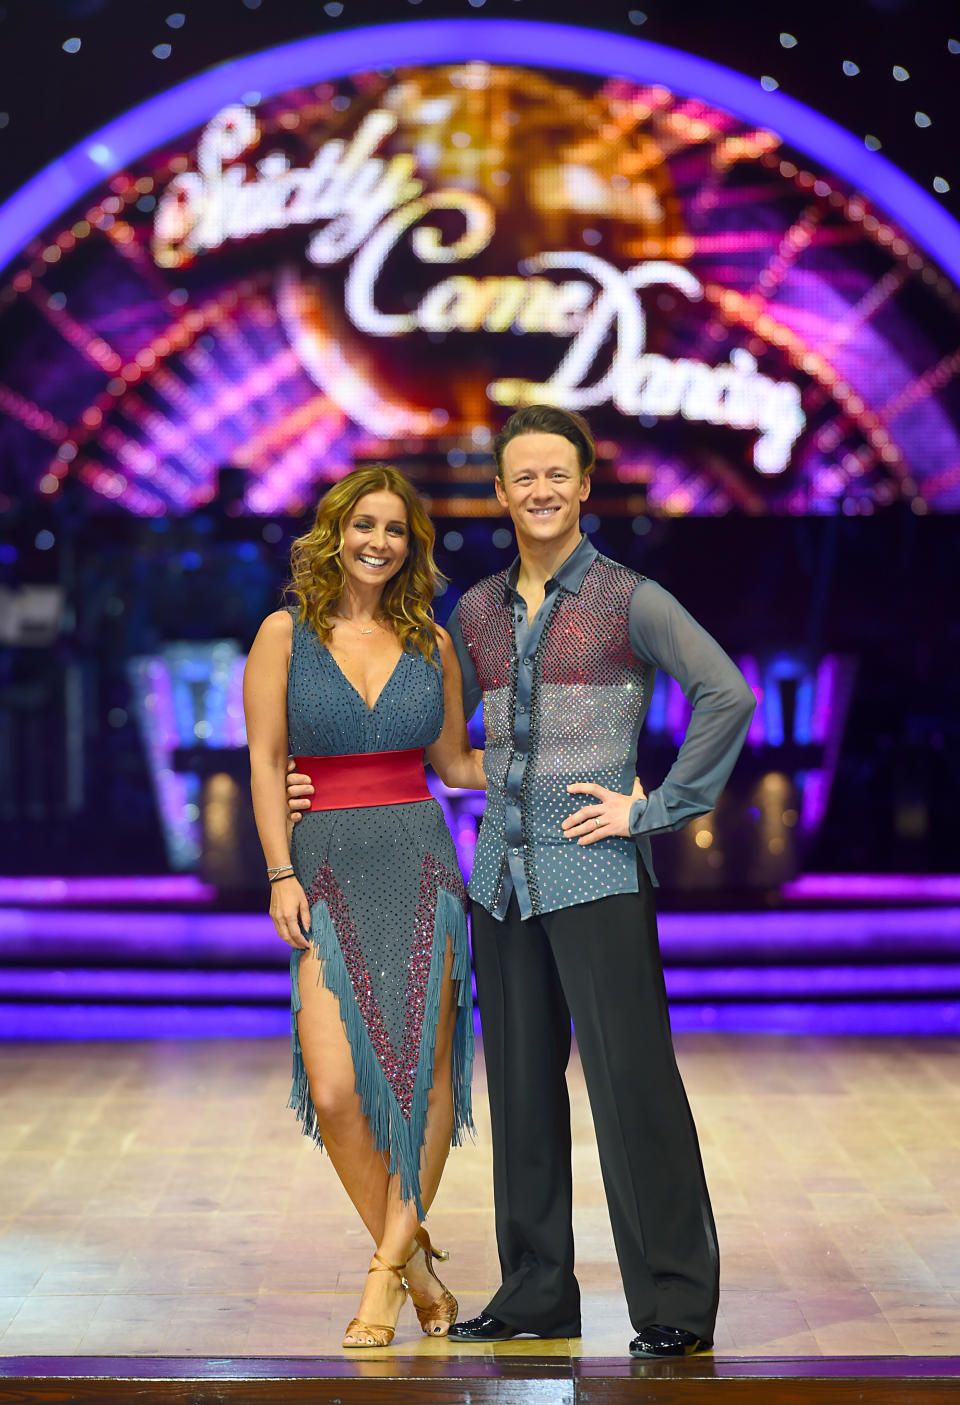 Louise Redknapp and Kevin Clifton during a photocall for the launch of Strictly Come Dancing Live Tour held at Barclaycard Arena in Birmingham.